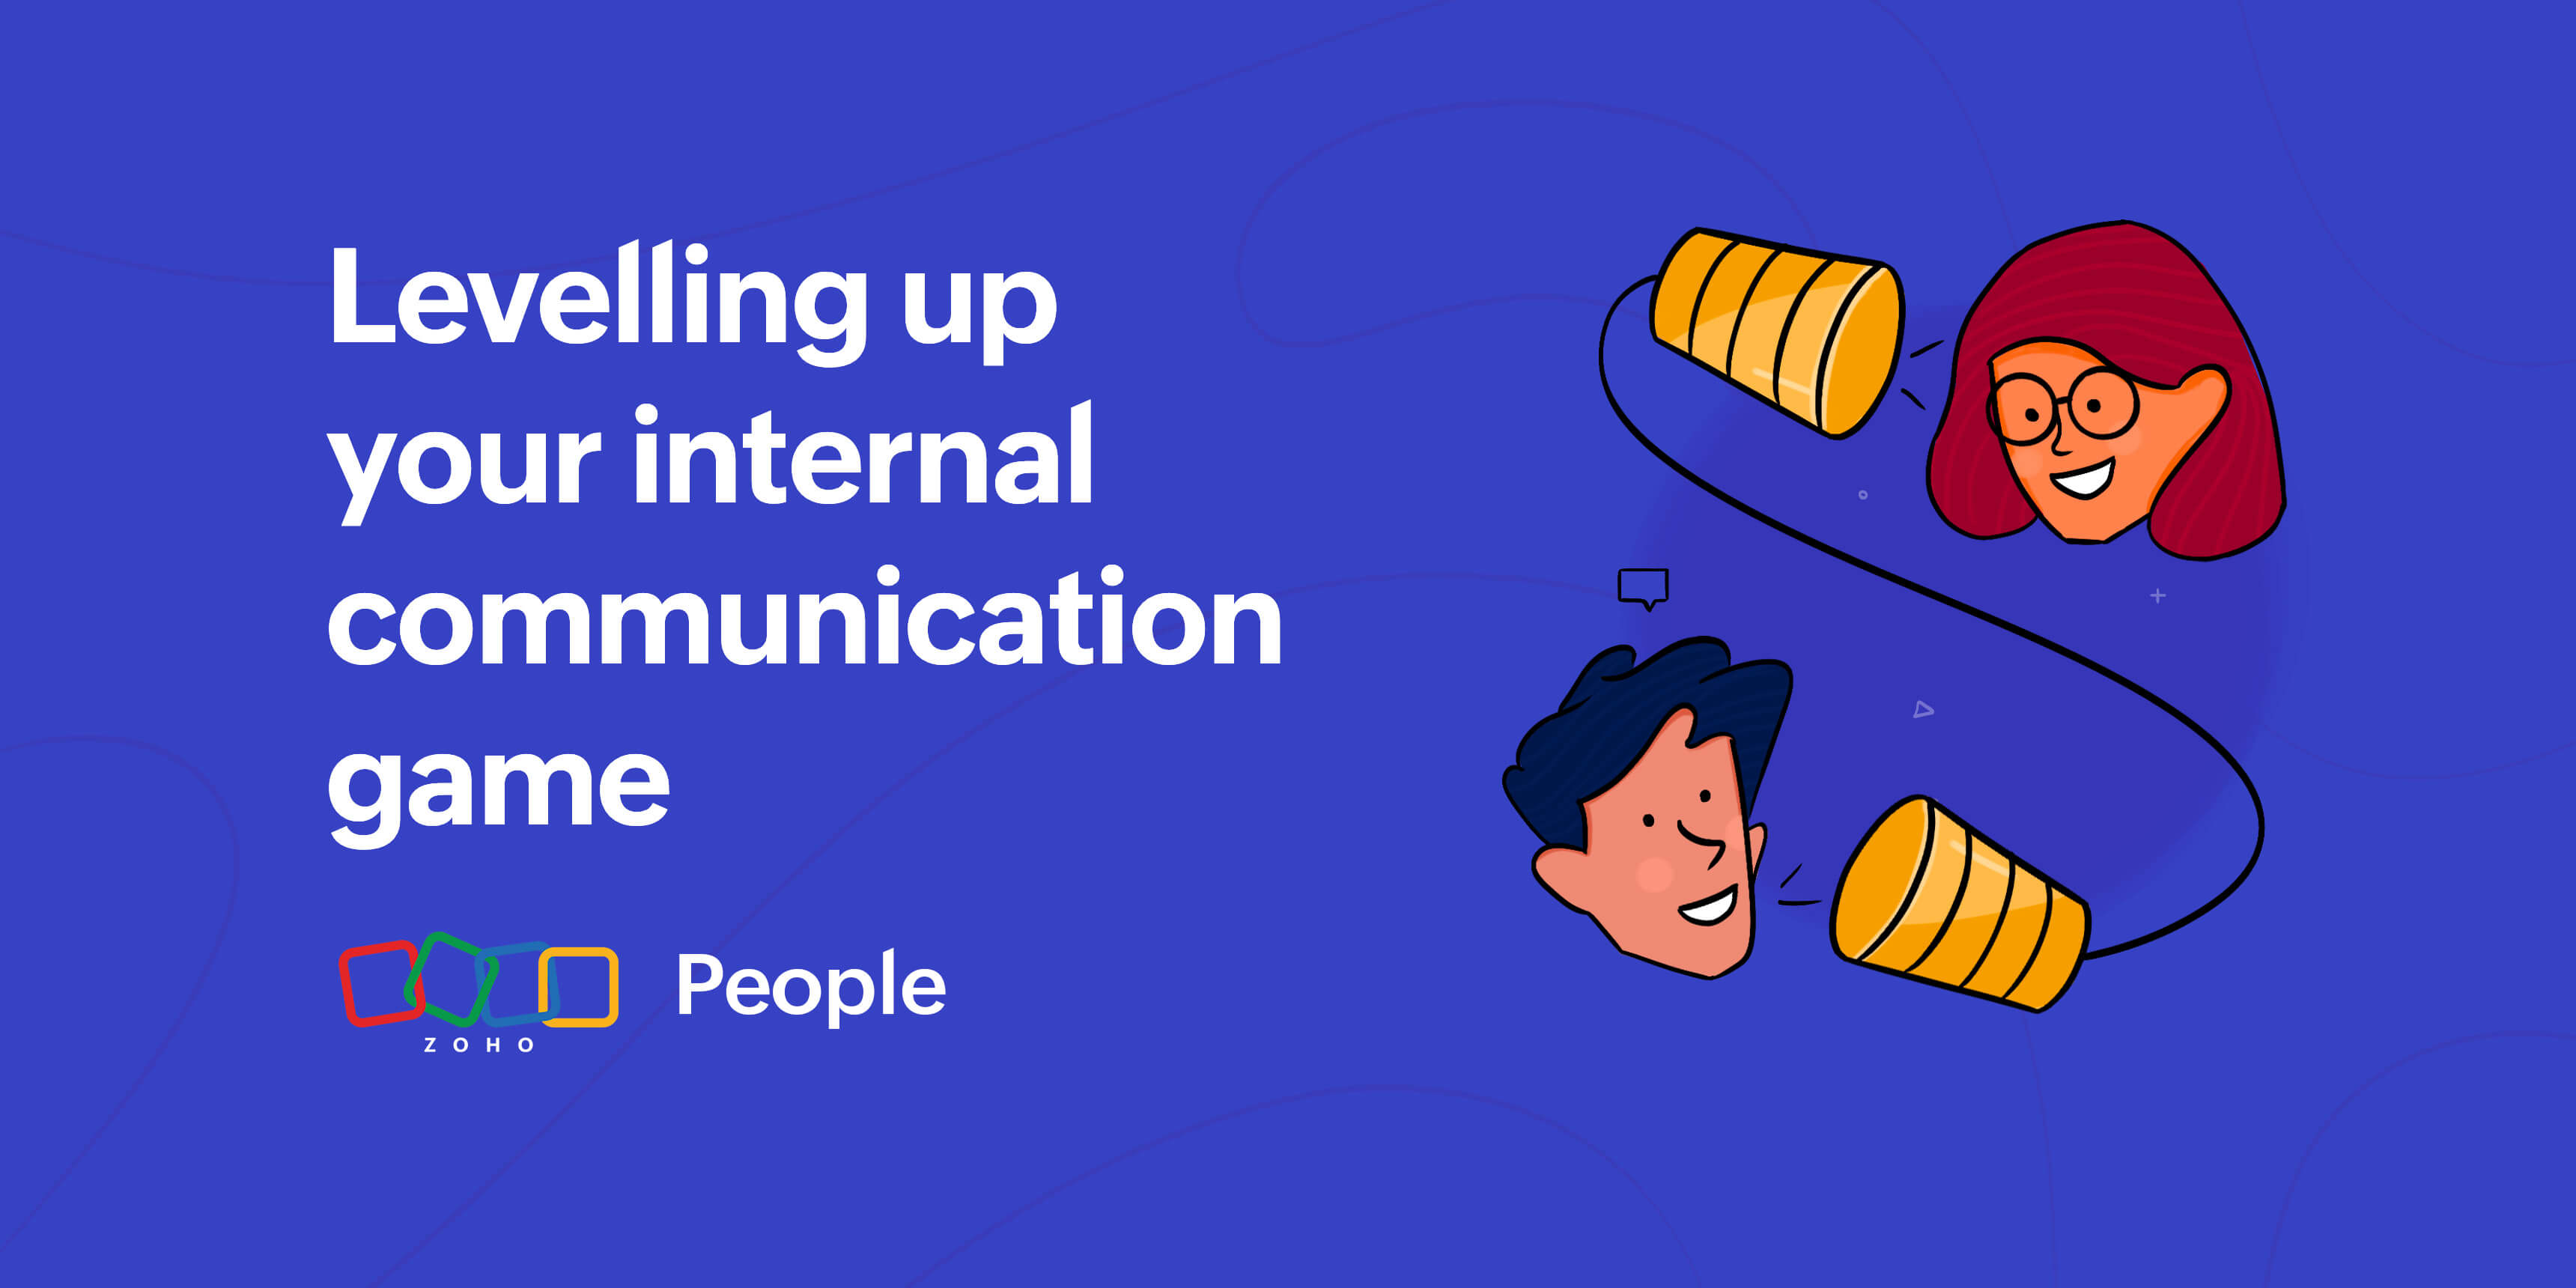 6 tips to communicate with employees